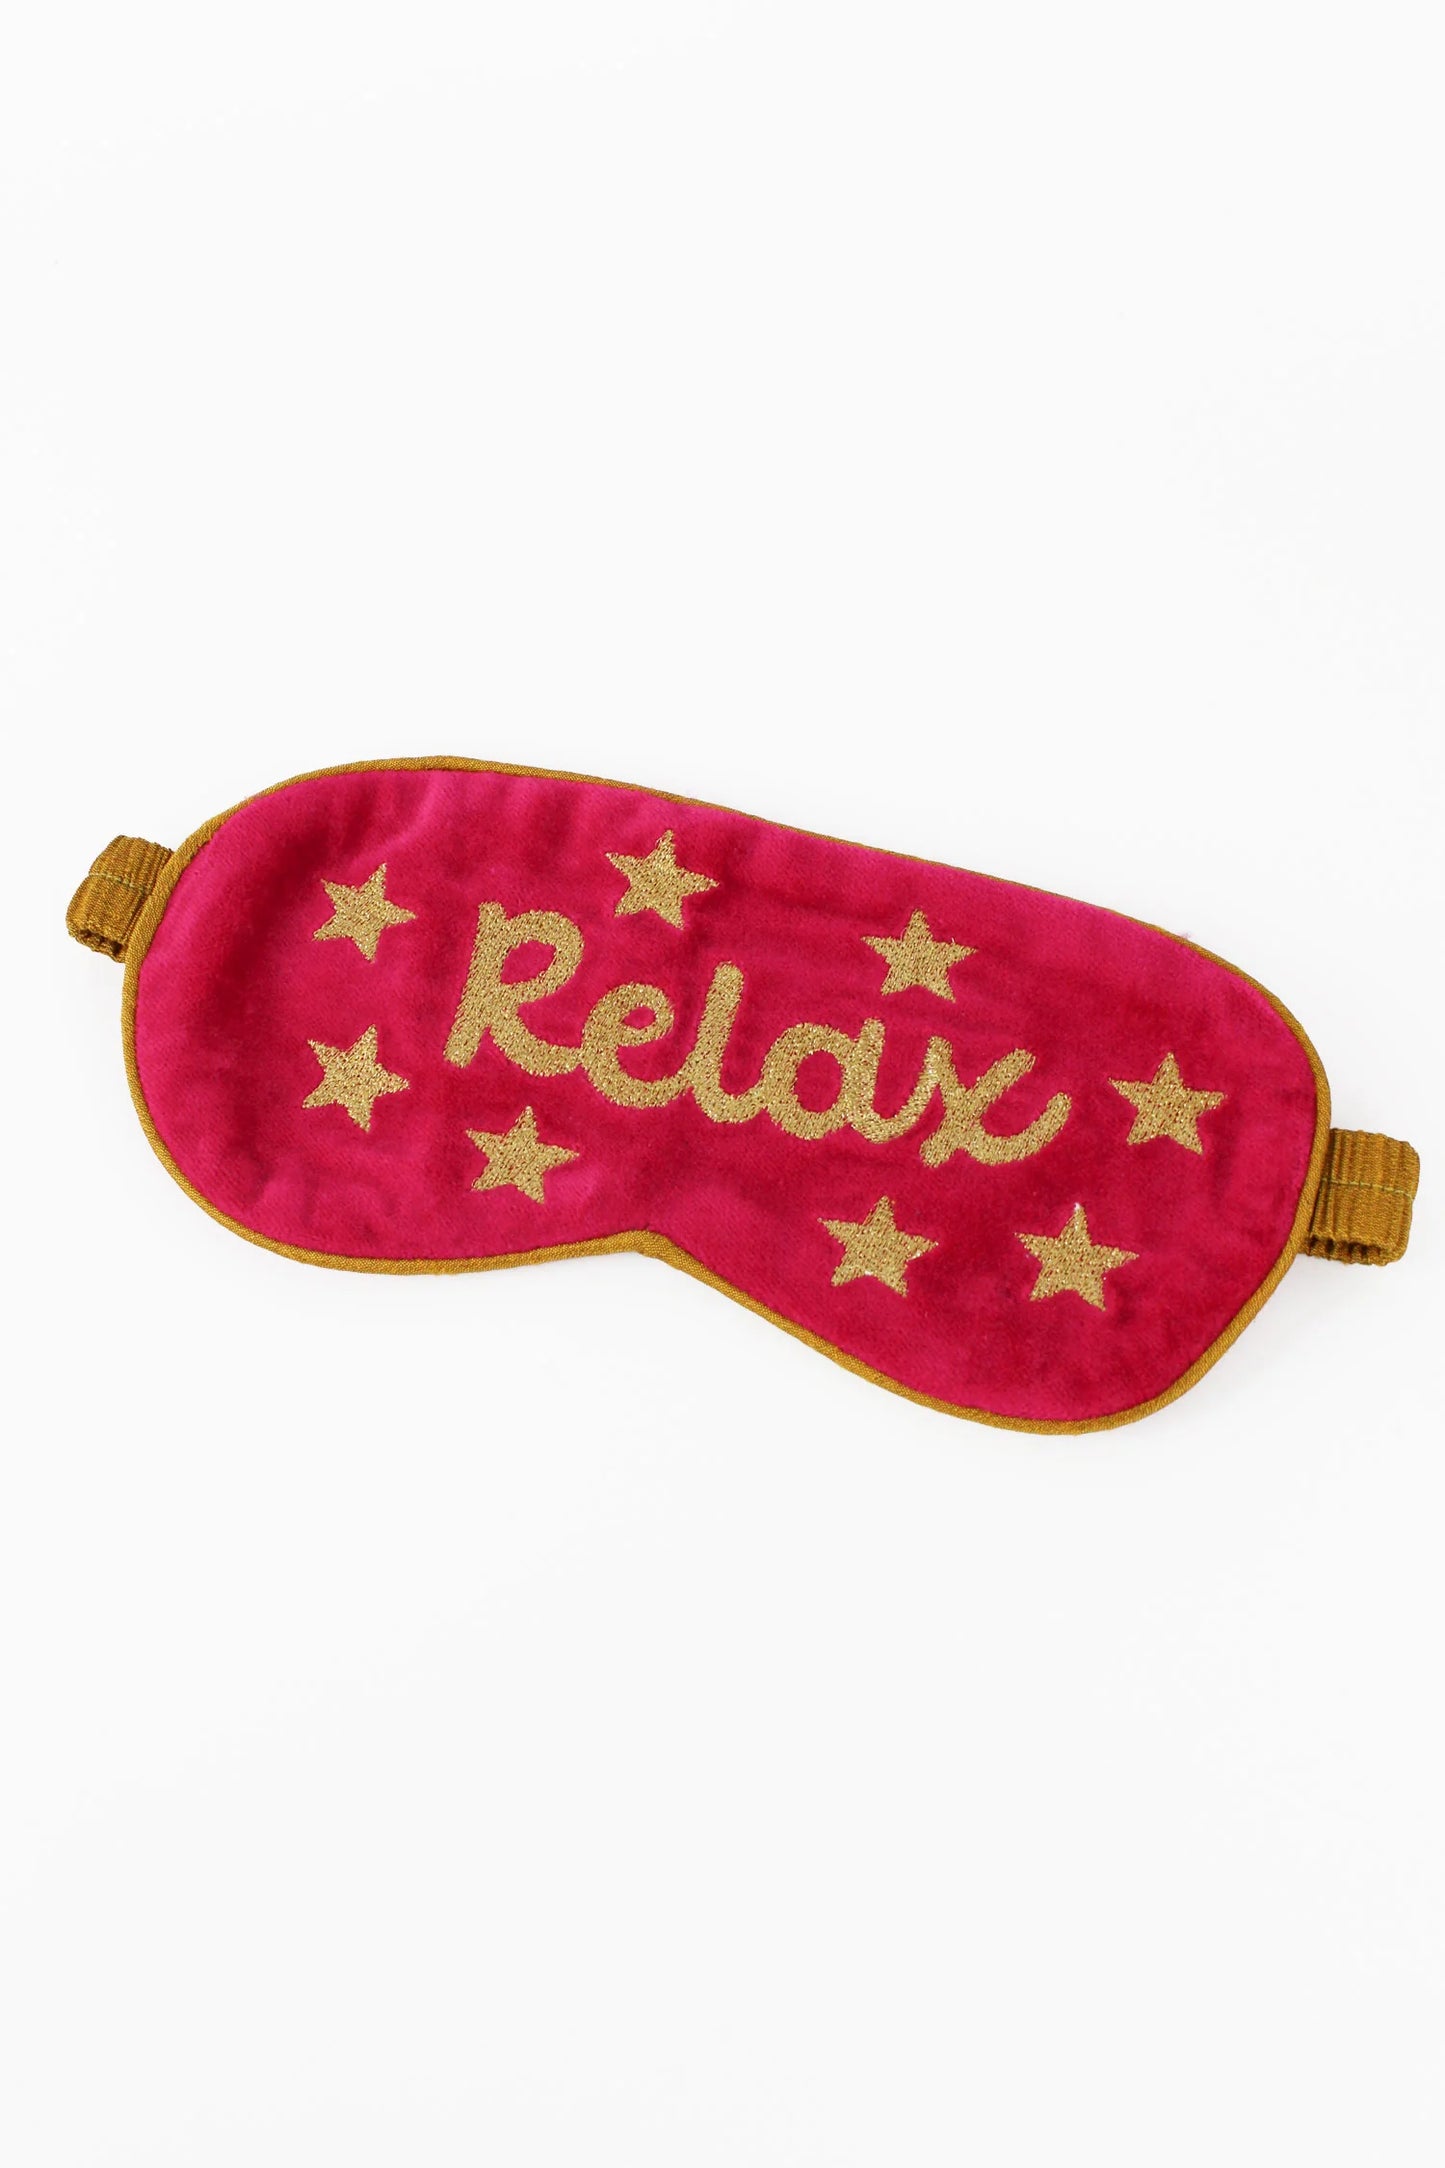 This beautiful 'dreamy' eye mask is embroidered in India using luxury gold thread onto plush pink velvet.